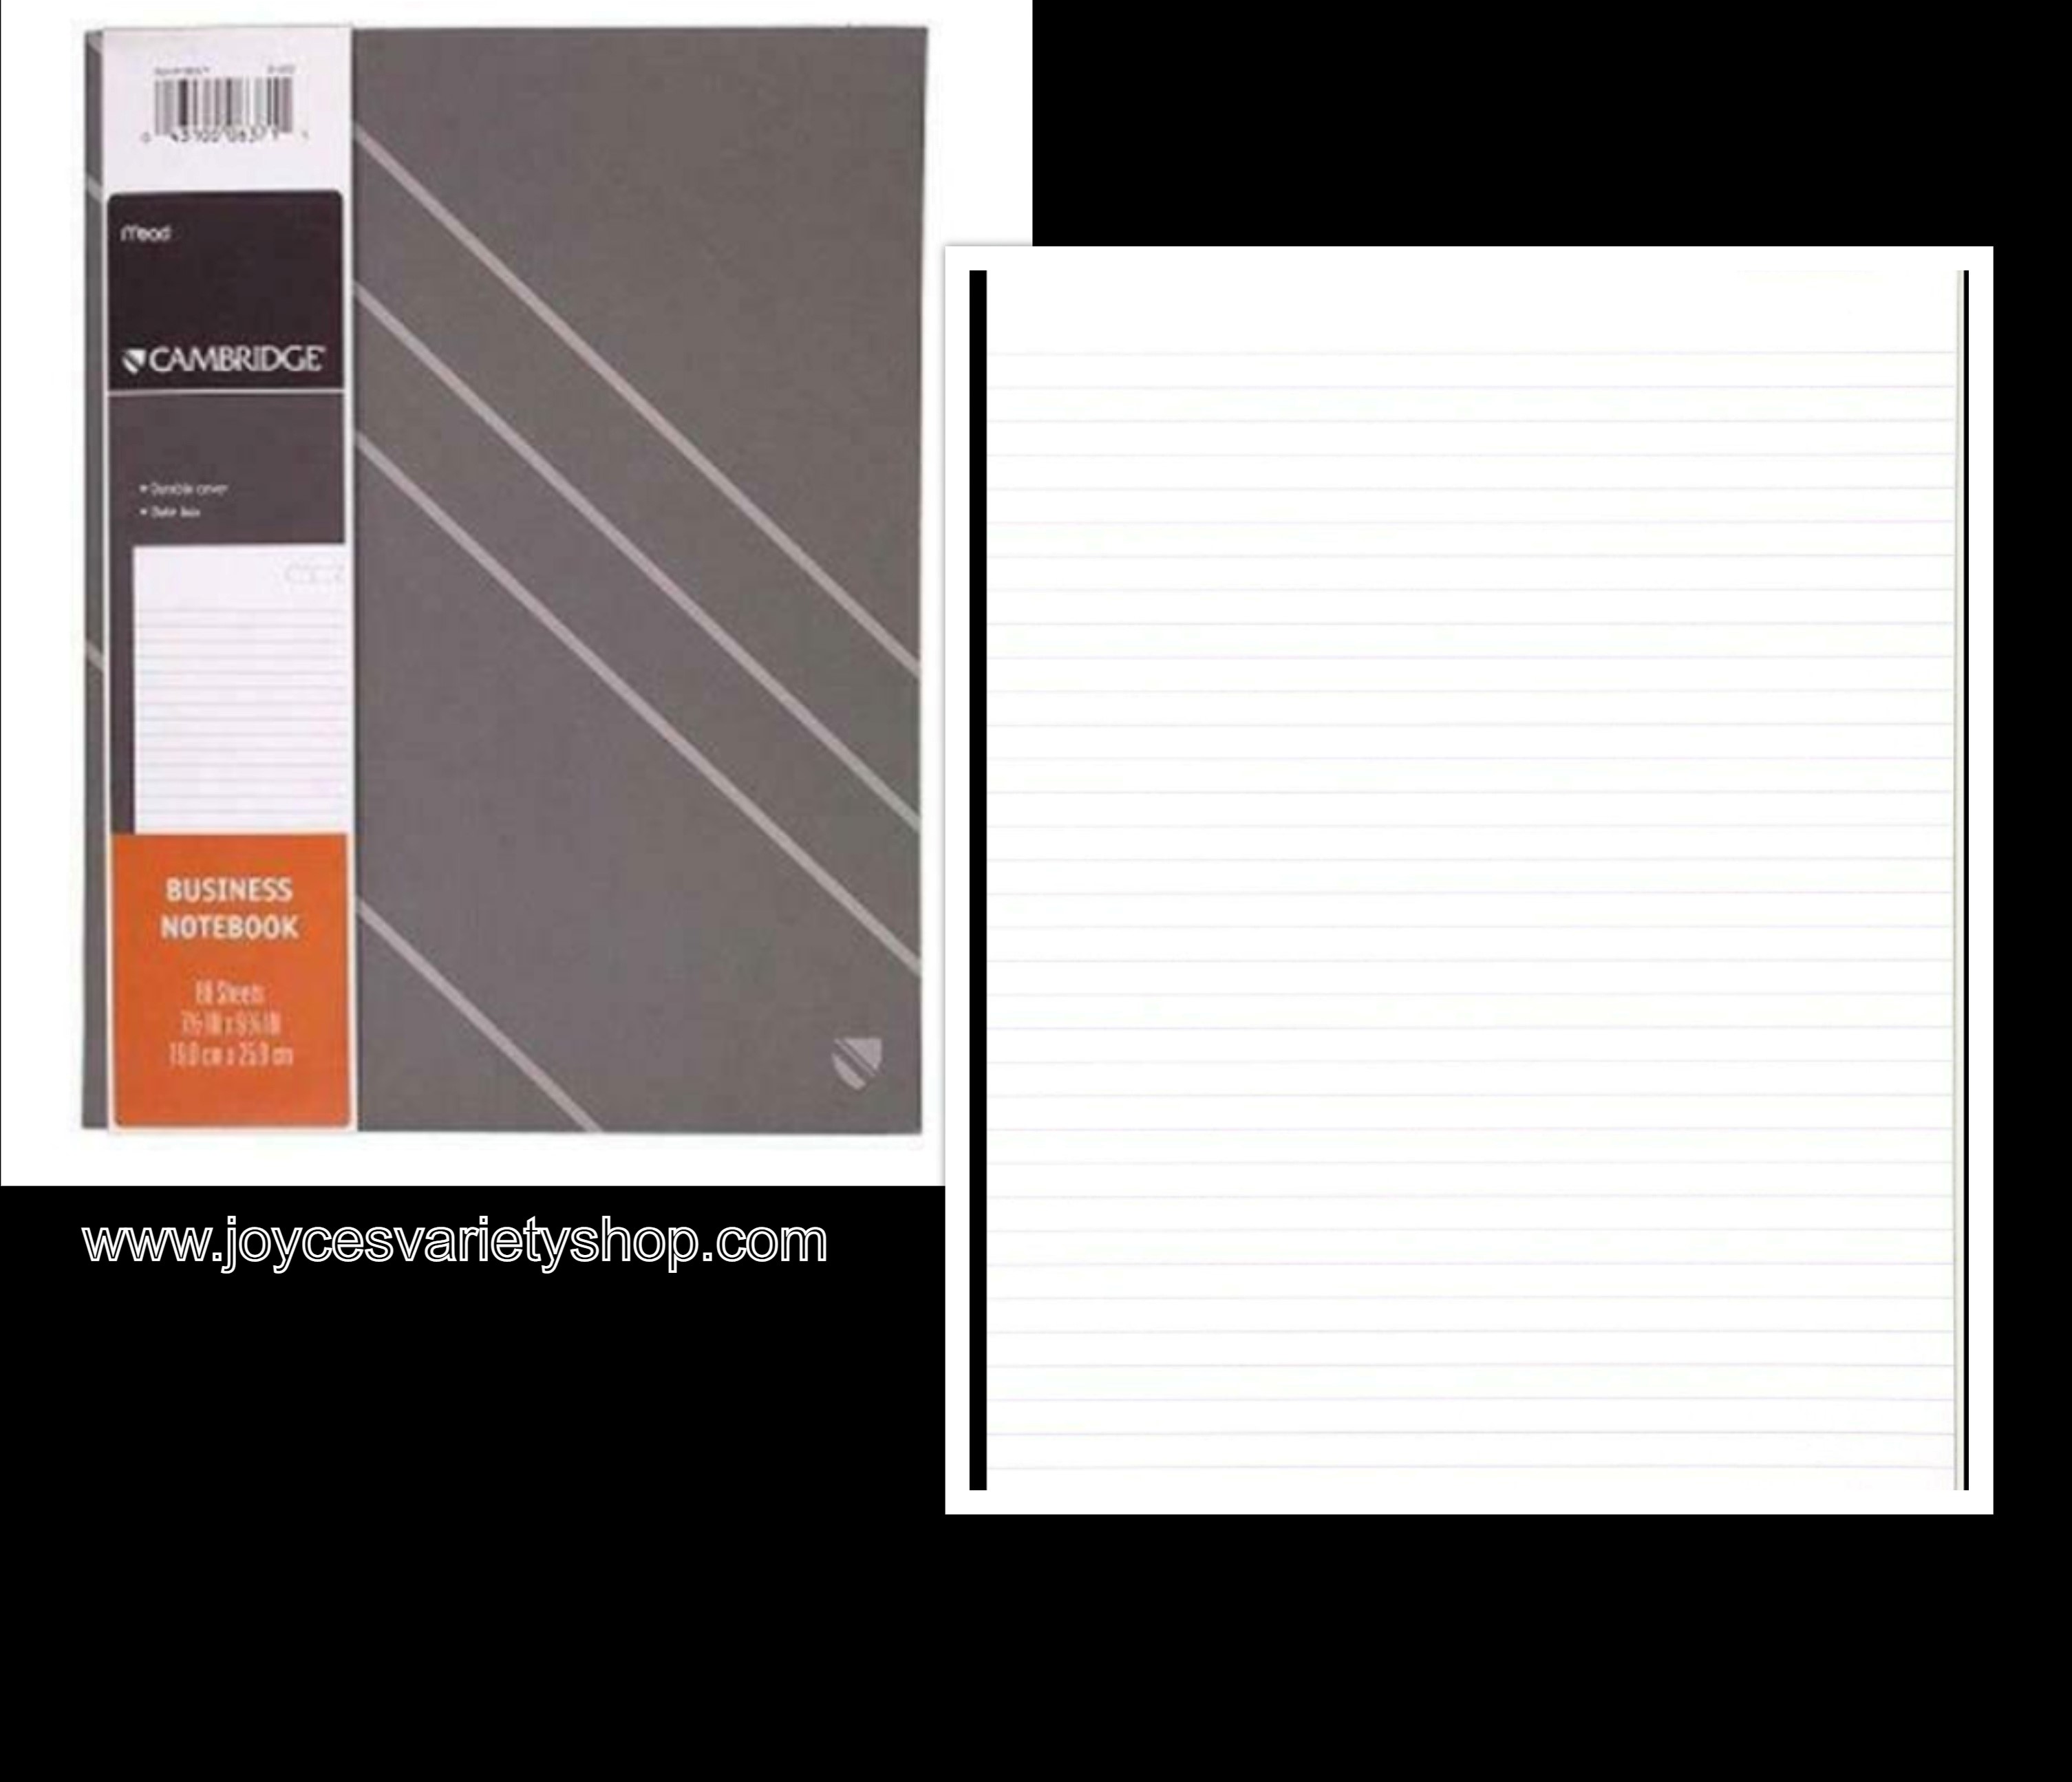 Mead Cambridge Business Notebook, 80 Sheets, 7 1/2" x 9 7/8" (06371) Gray